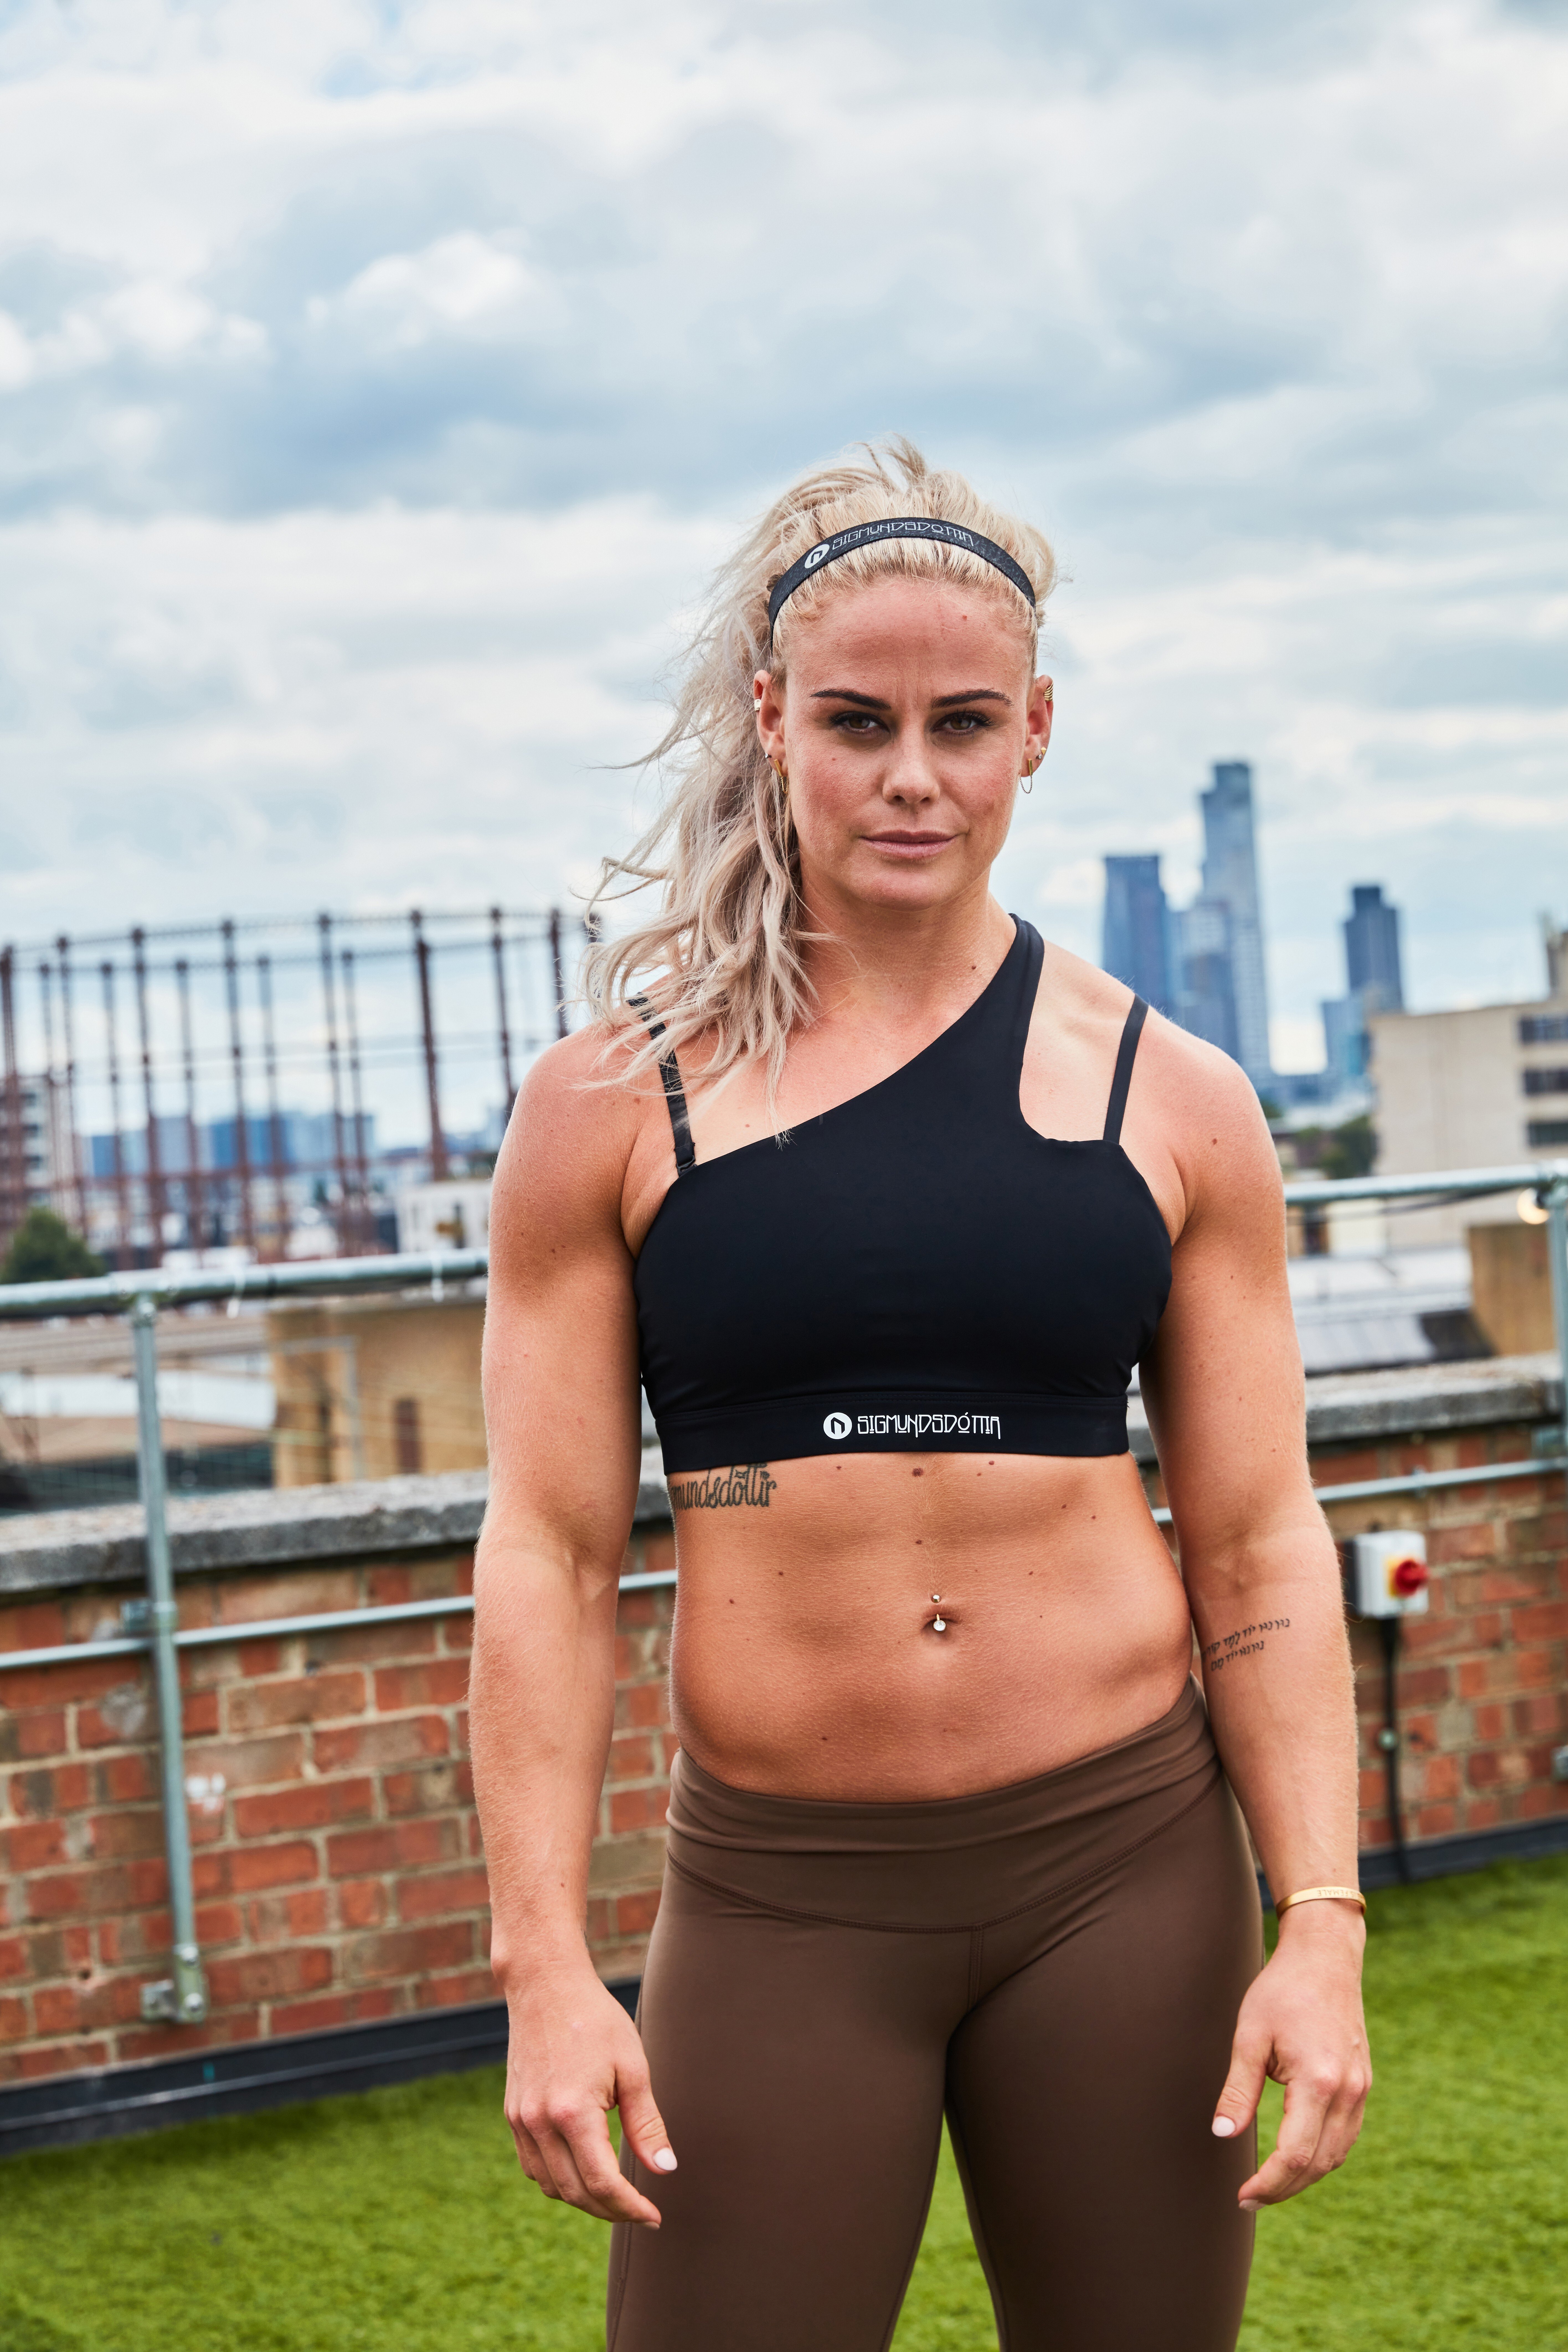 Sara Sigmundsdottir said she has come along way when it comes to accepting her body as strong and beautiful because she does CrossFit, not in spite of it. Photo: WIT Fitness